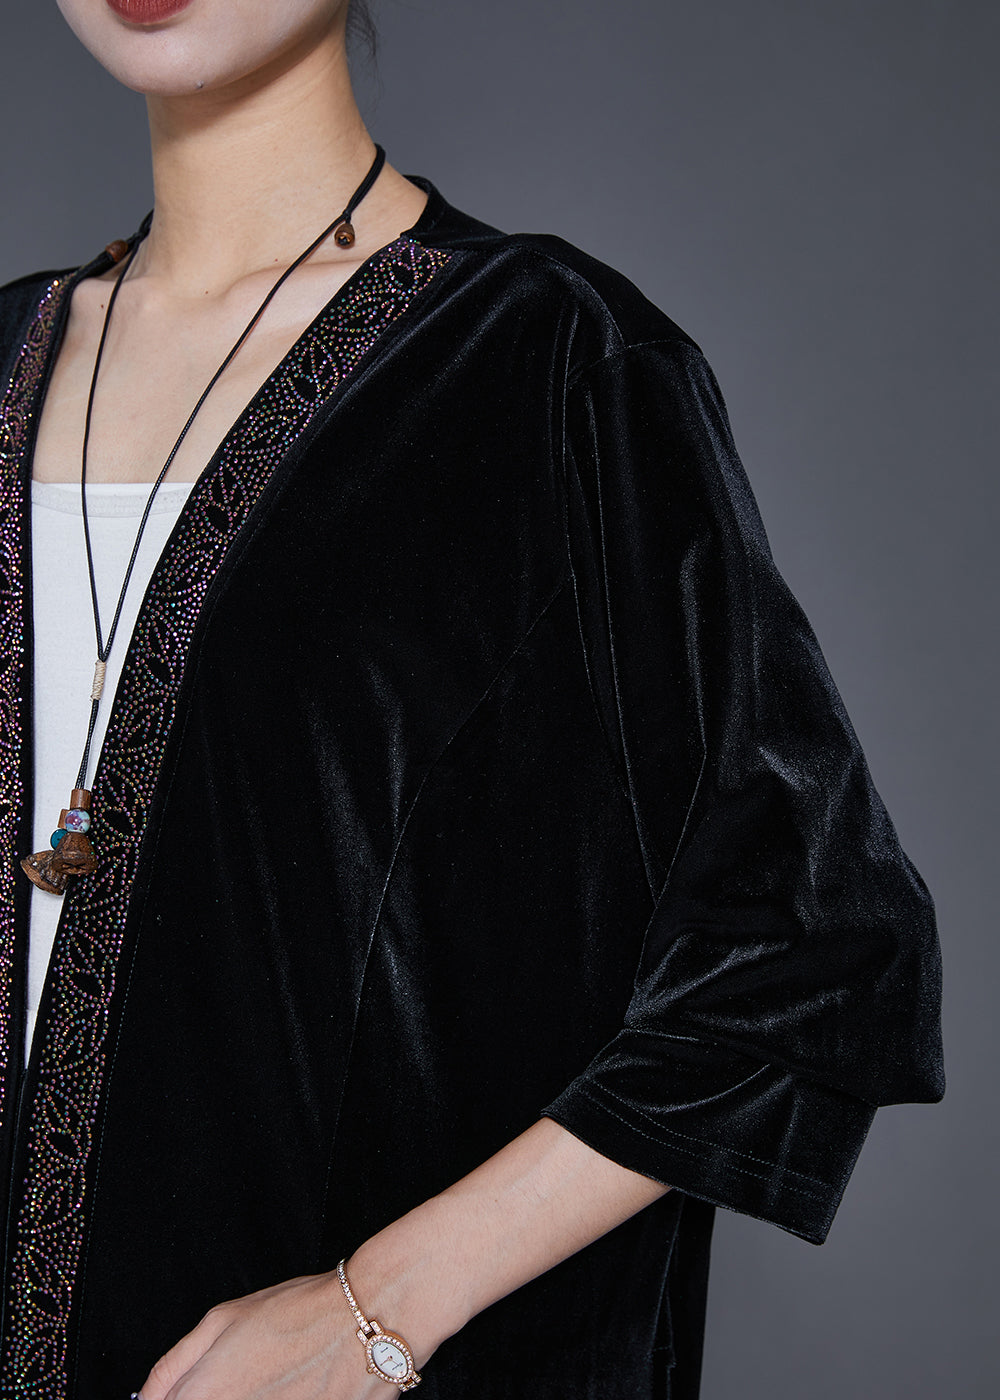 Style Black Embroideried Oversized Silk Velour Long Cardigan Fall